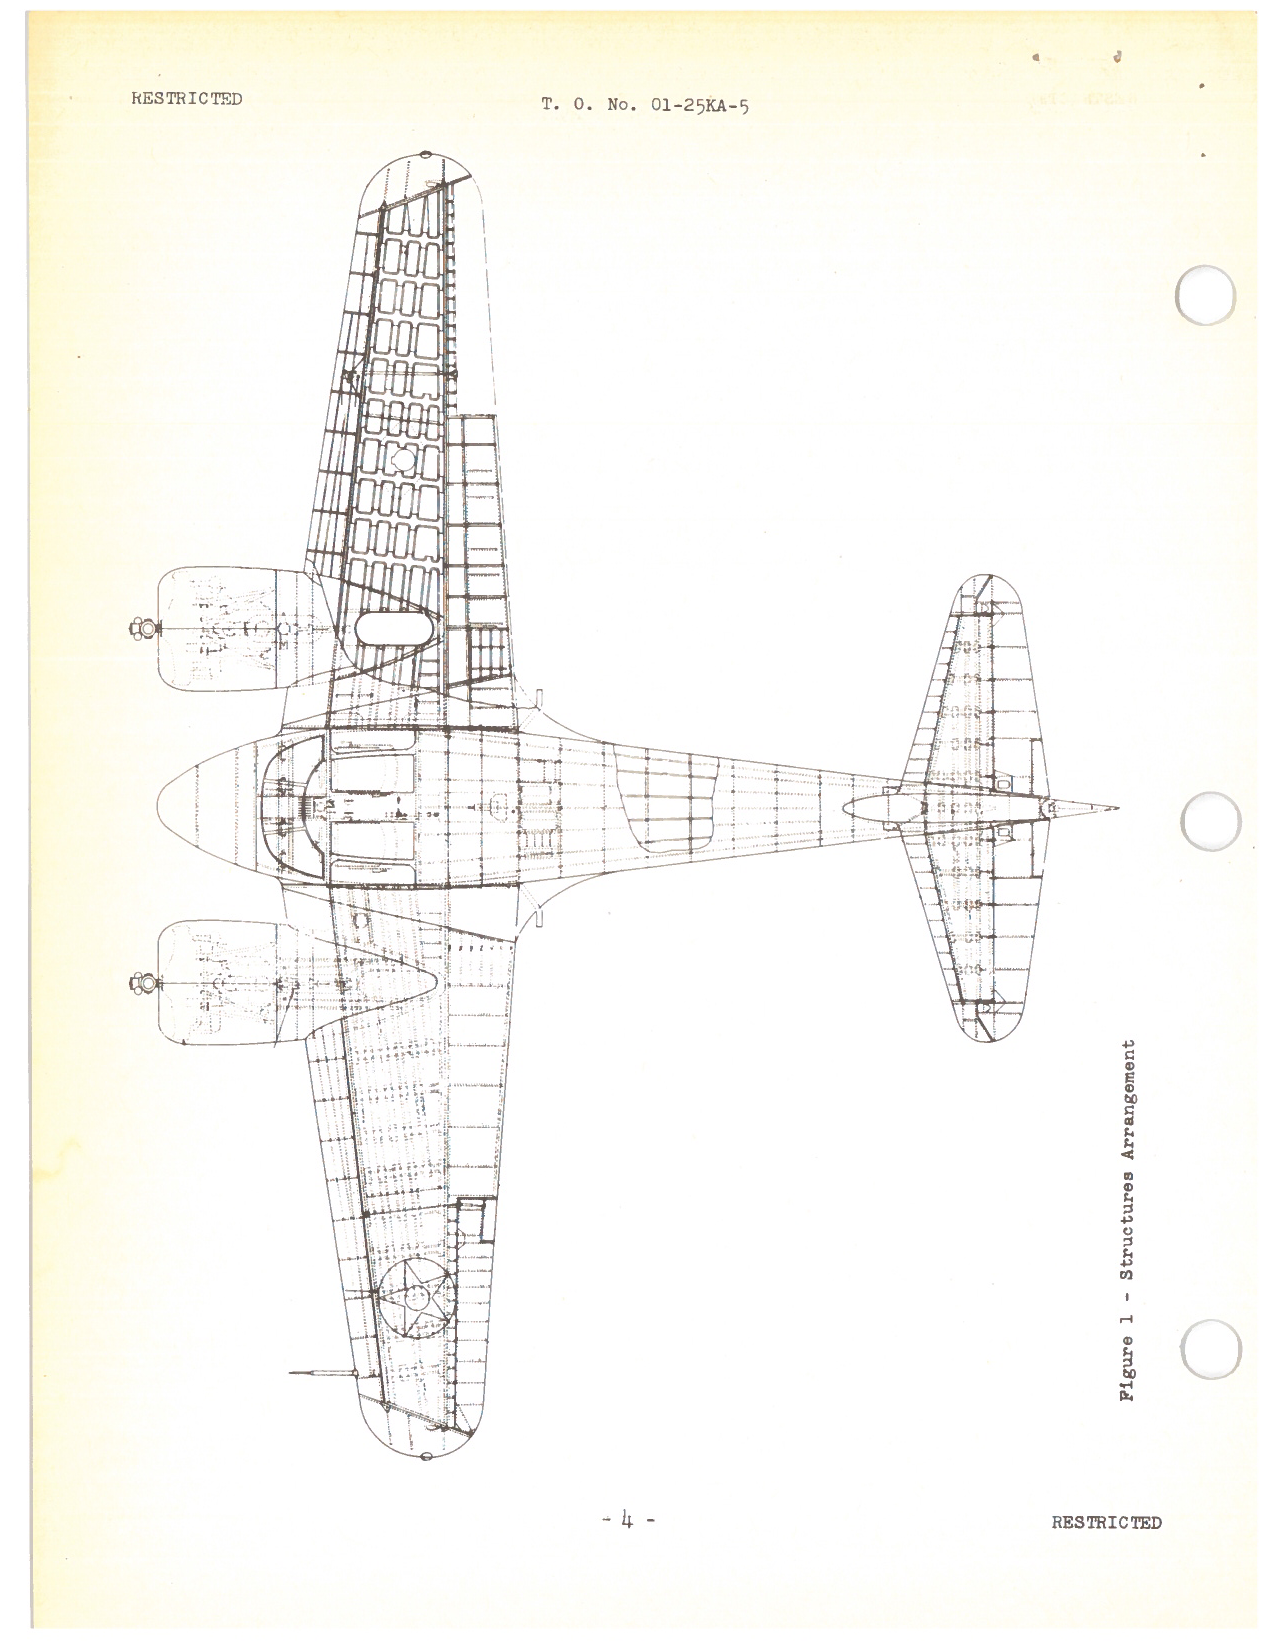 Sample page 6 from AirCorps Library document: Structural Repair Manual for the AT-9 Advanced Training Airplane